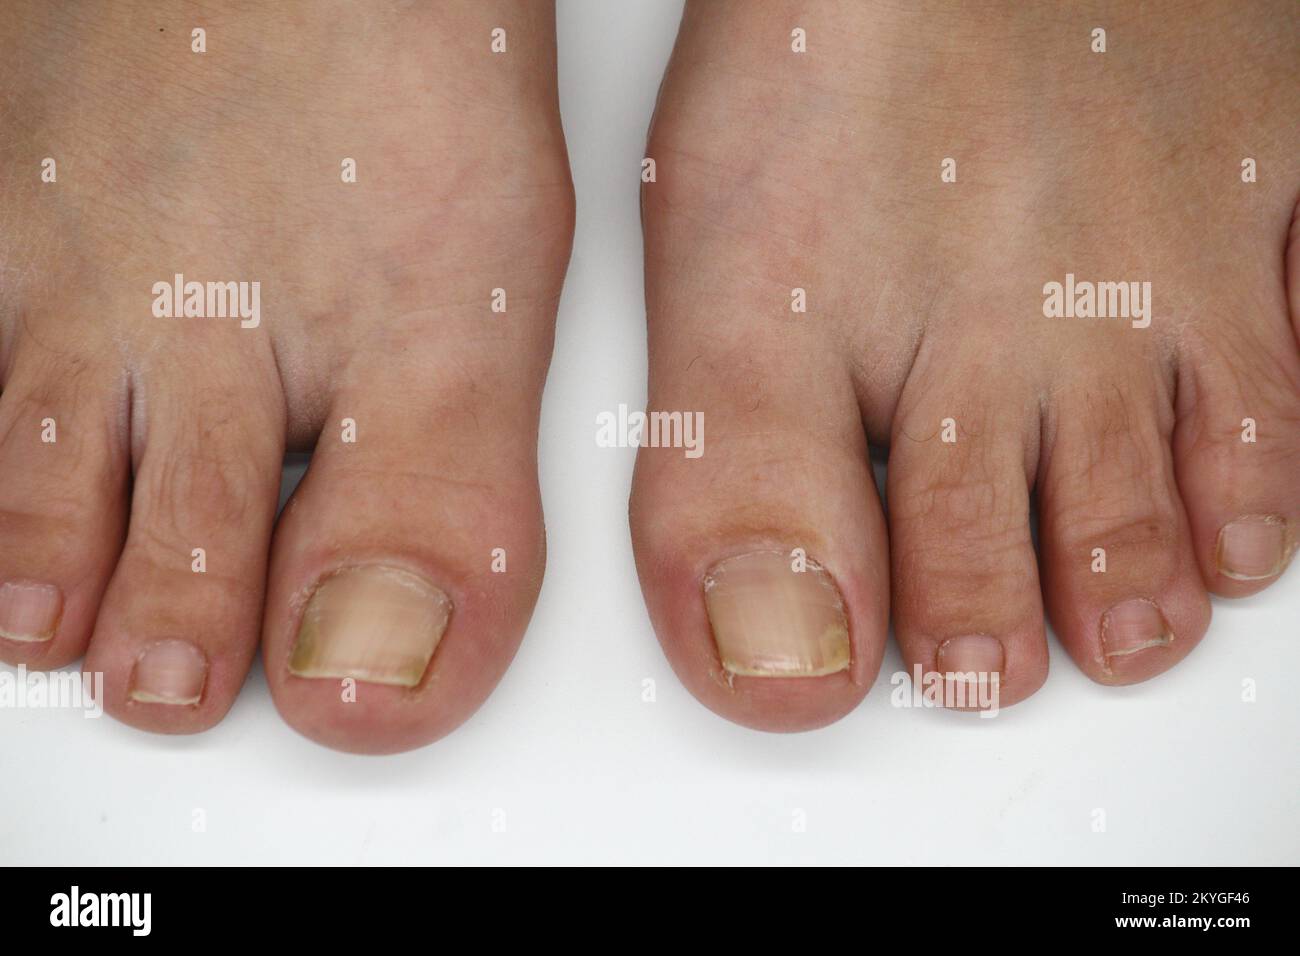 Big toe nail of a person suffering from onychomycosis, a fungal infection that causes yellowing of the nail Stock Photo